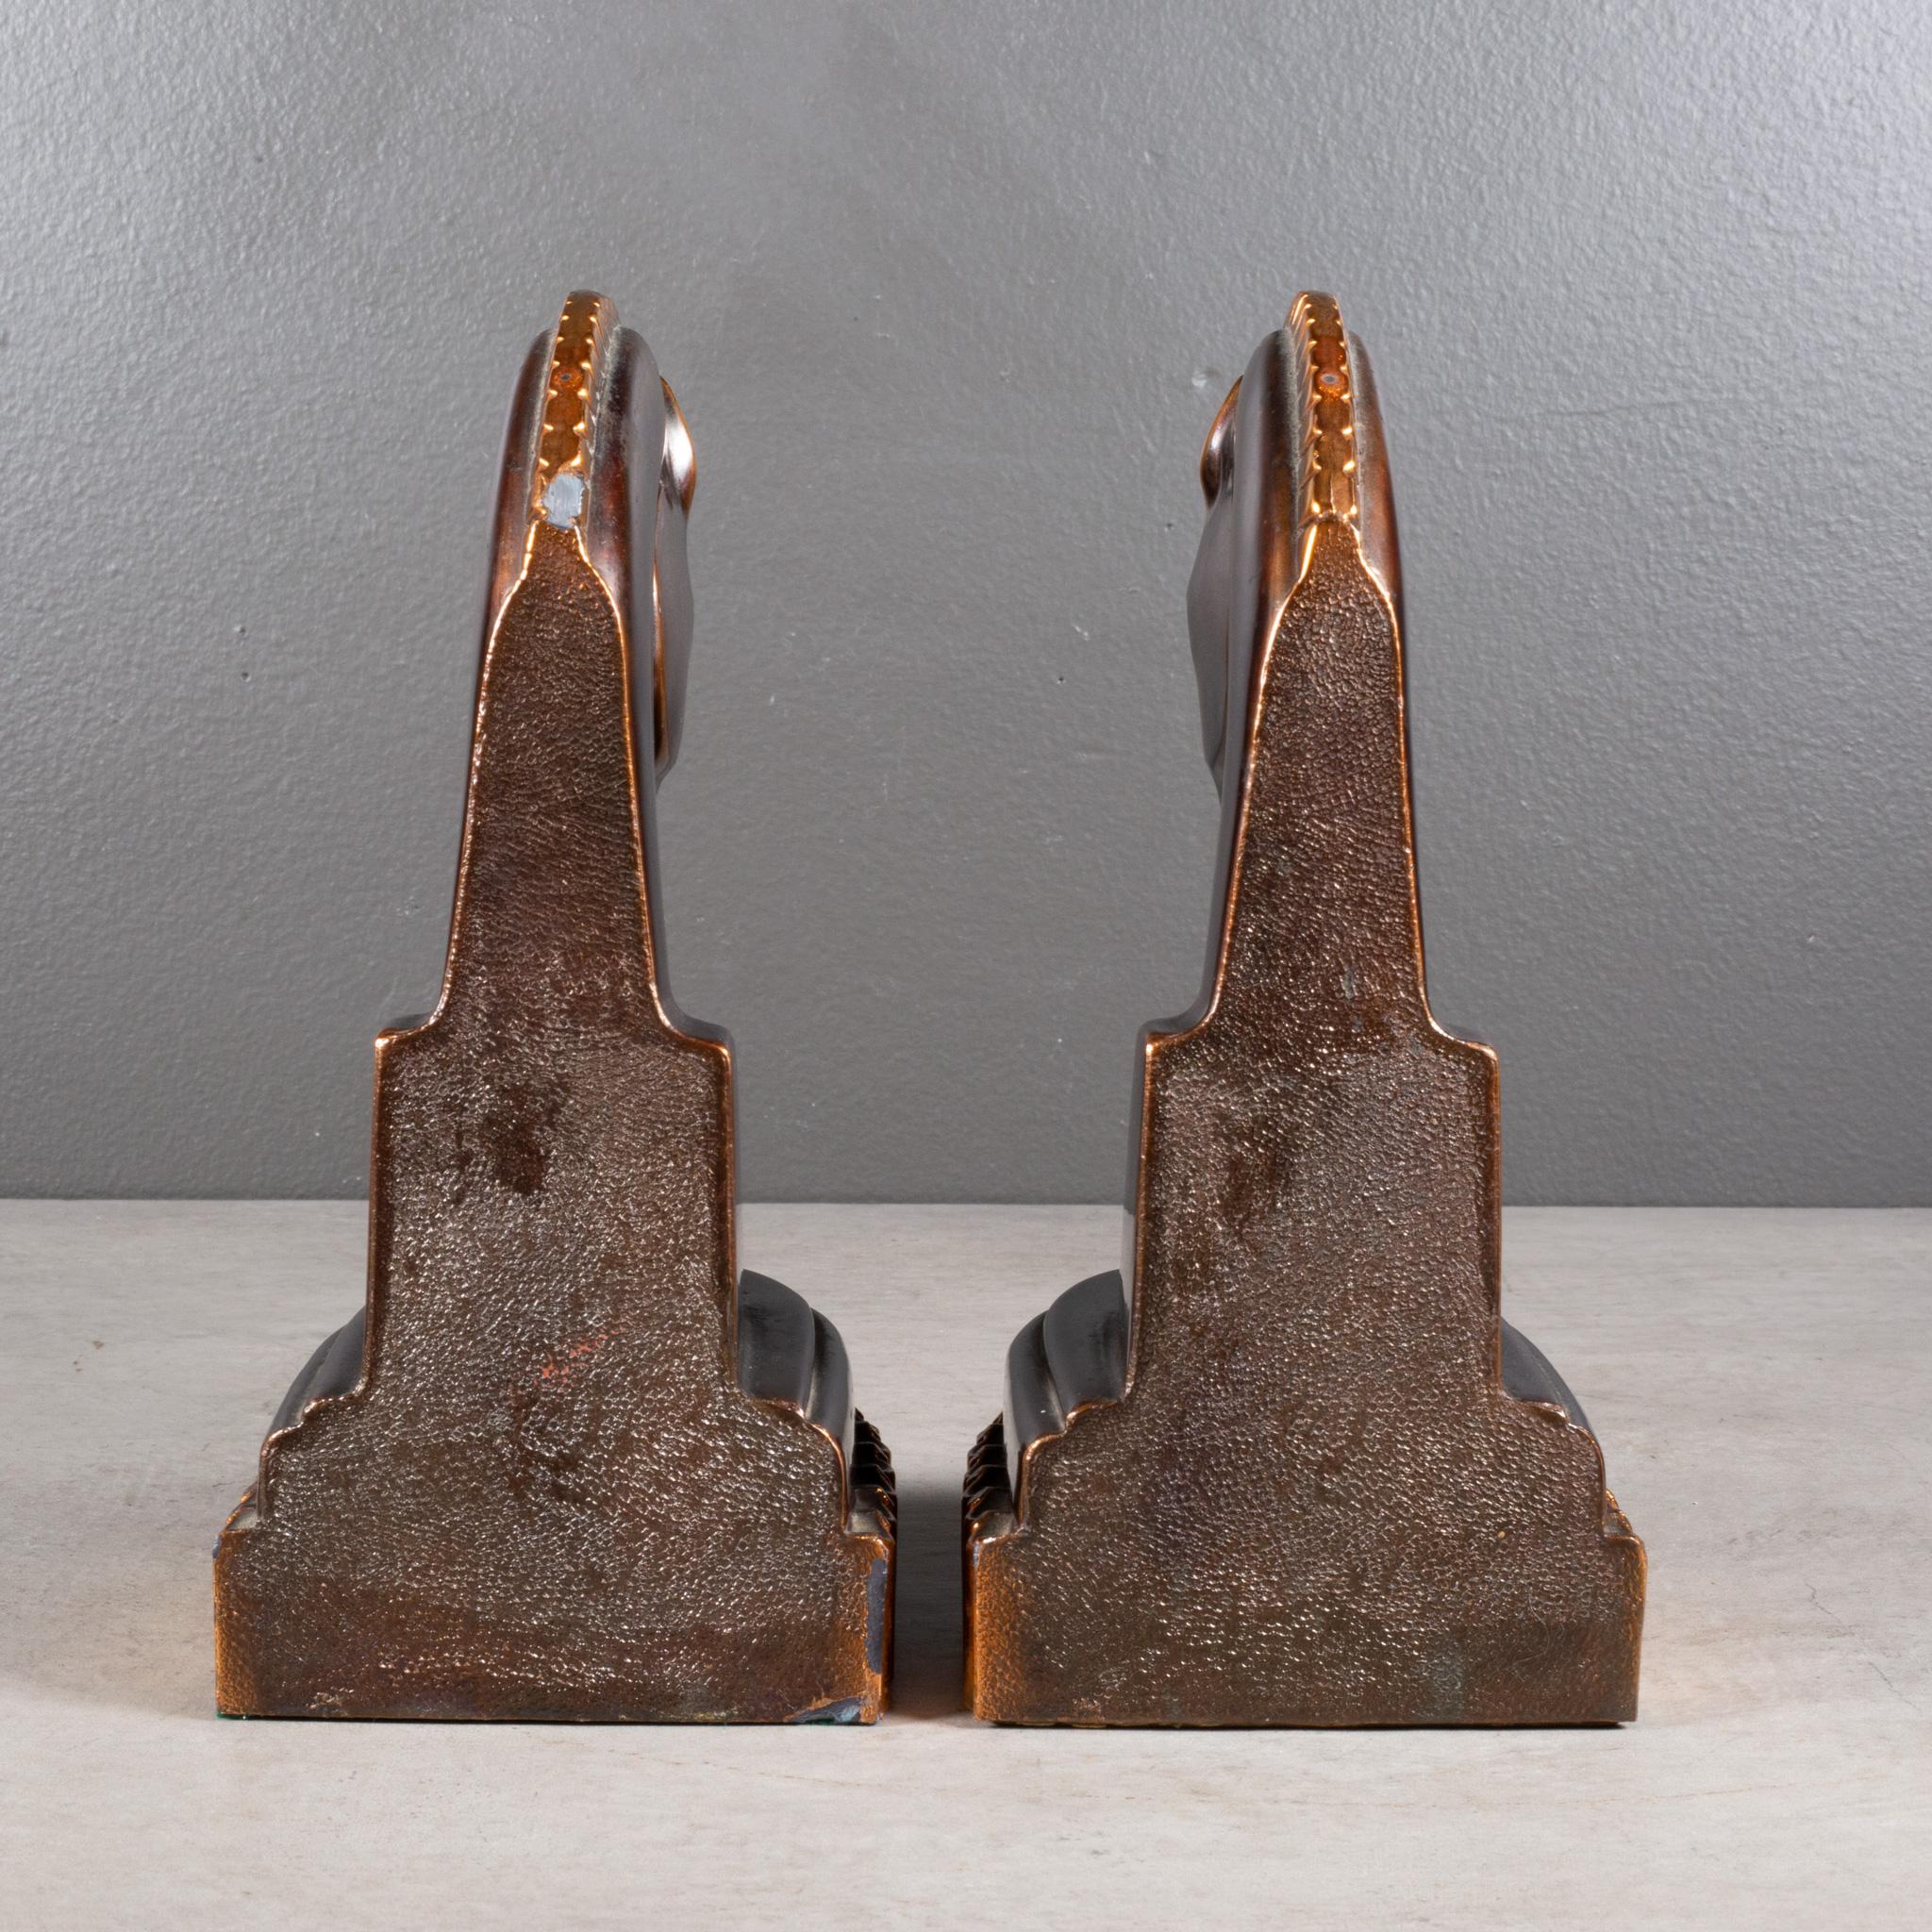 Oversized Art Deco Bronze & Copper Trojan Horse Bookends c.1930 (FREE SHIPPING) For Sale 1